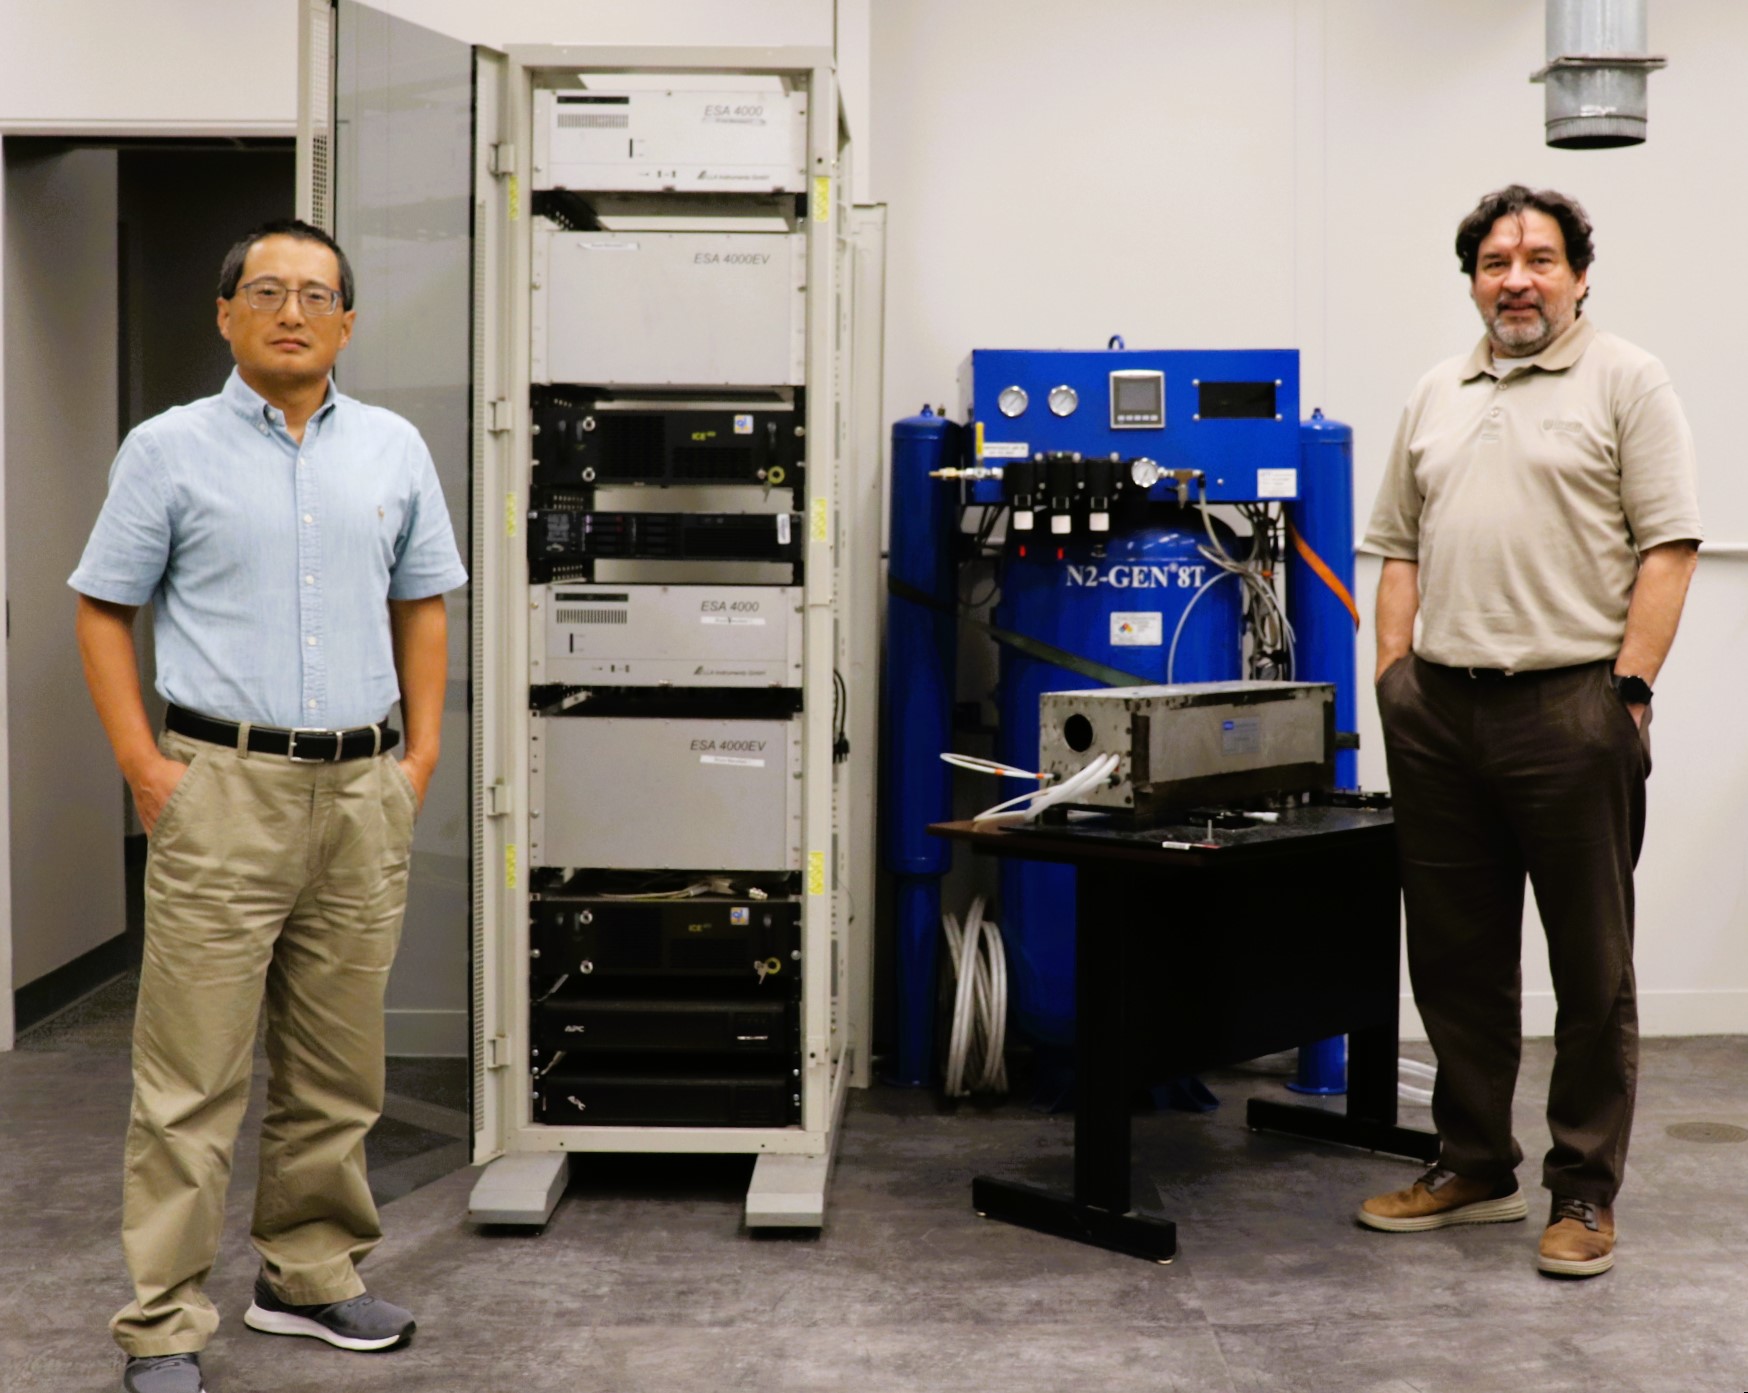 Zhen and Romero stand next to the cabinet, laser, and fuel source for their ML-Enhanced LIBS.